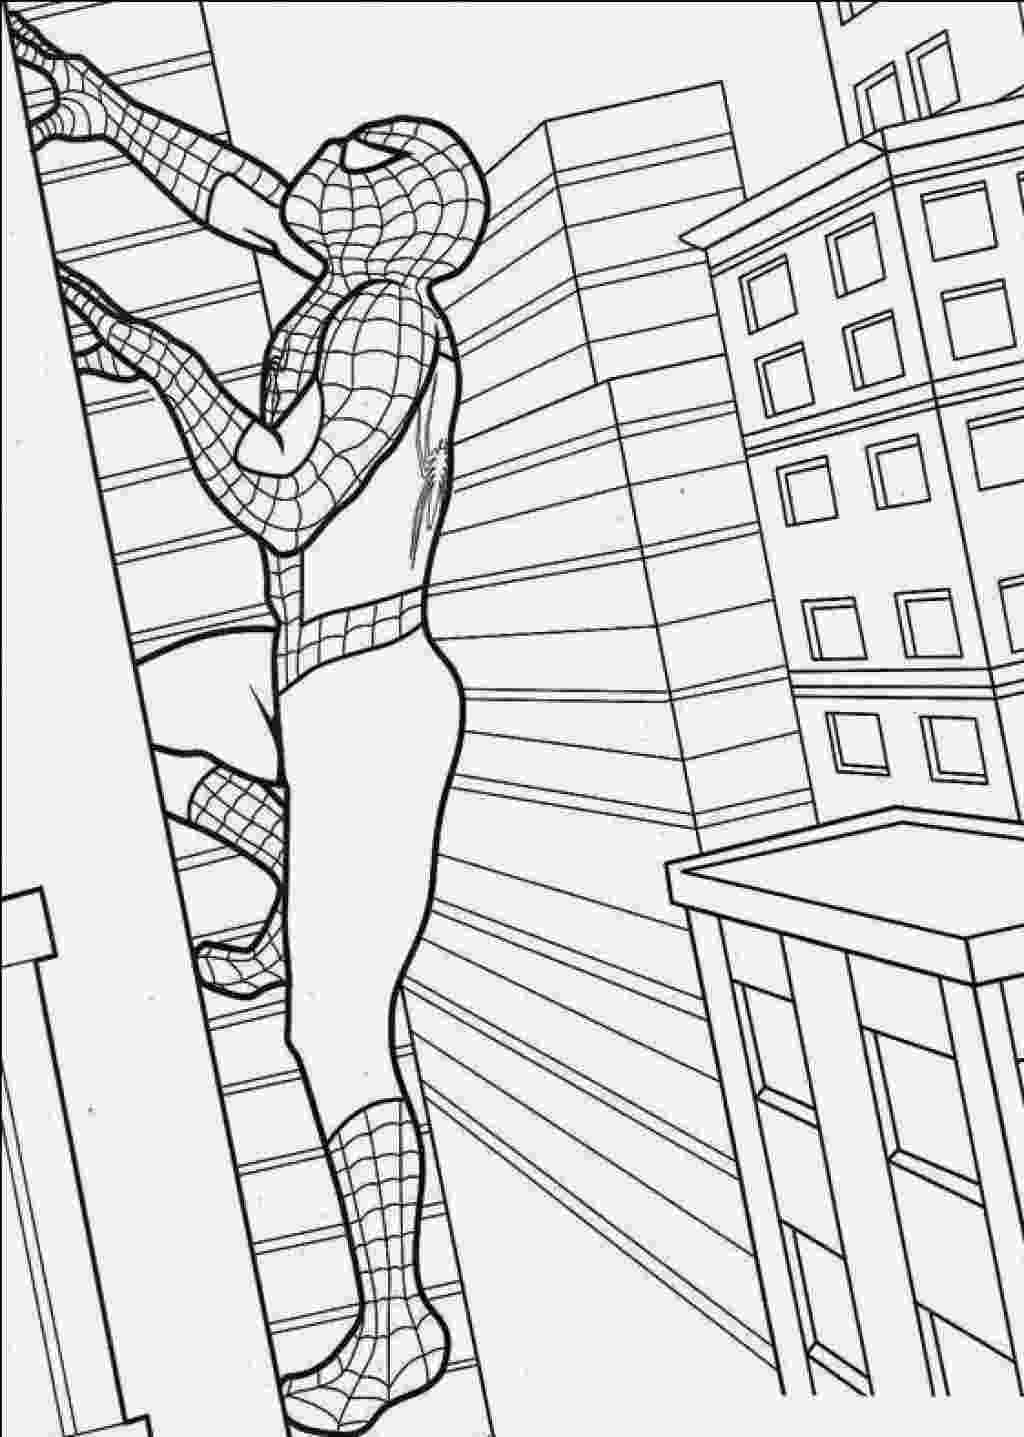 spiderman coloring pages free spiderman coloring pages coloring pages to print free pages spiderman coloring 